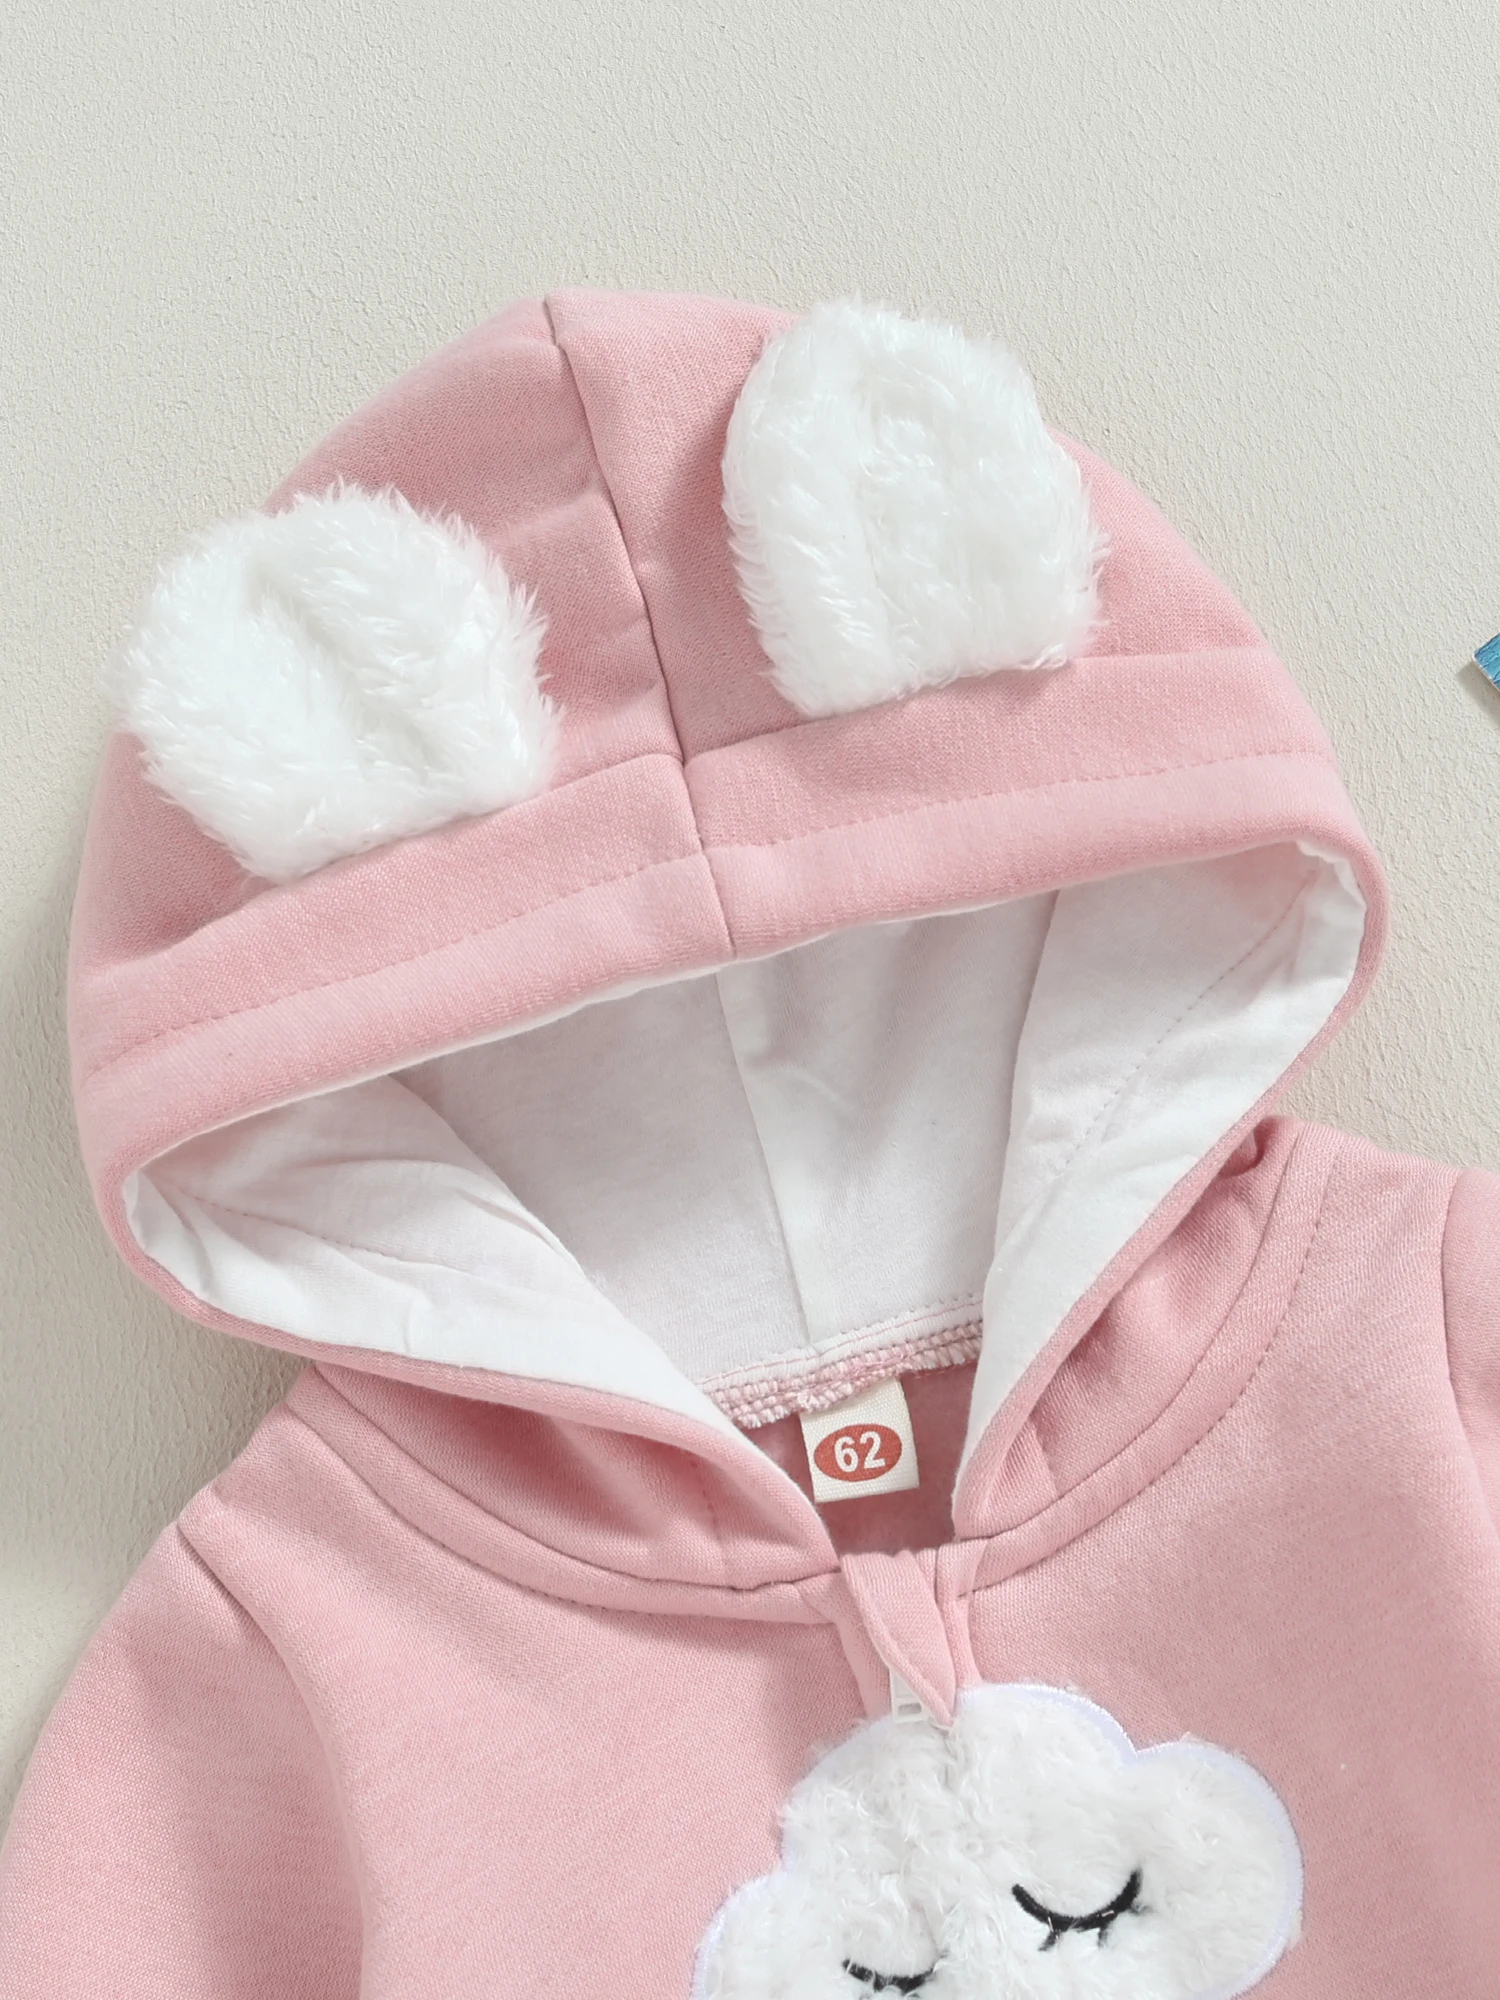 

Cute Infant Winter Overalls with Bear Appliqué and Fleece Lining - Adorable Hooded Snowsuit for Newborns